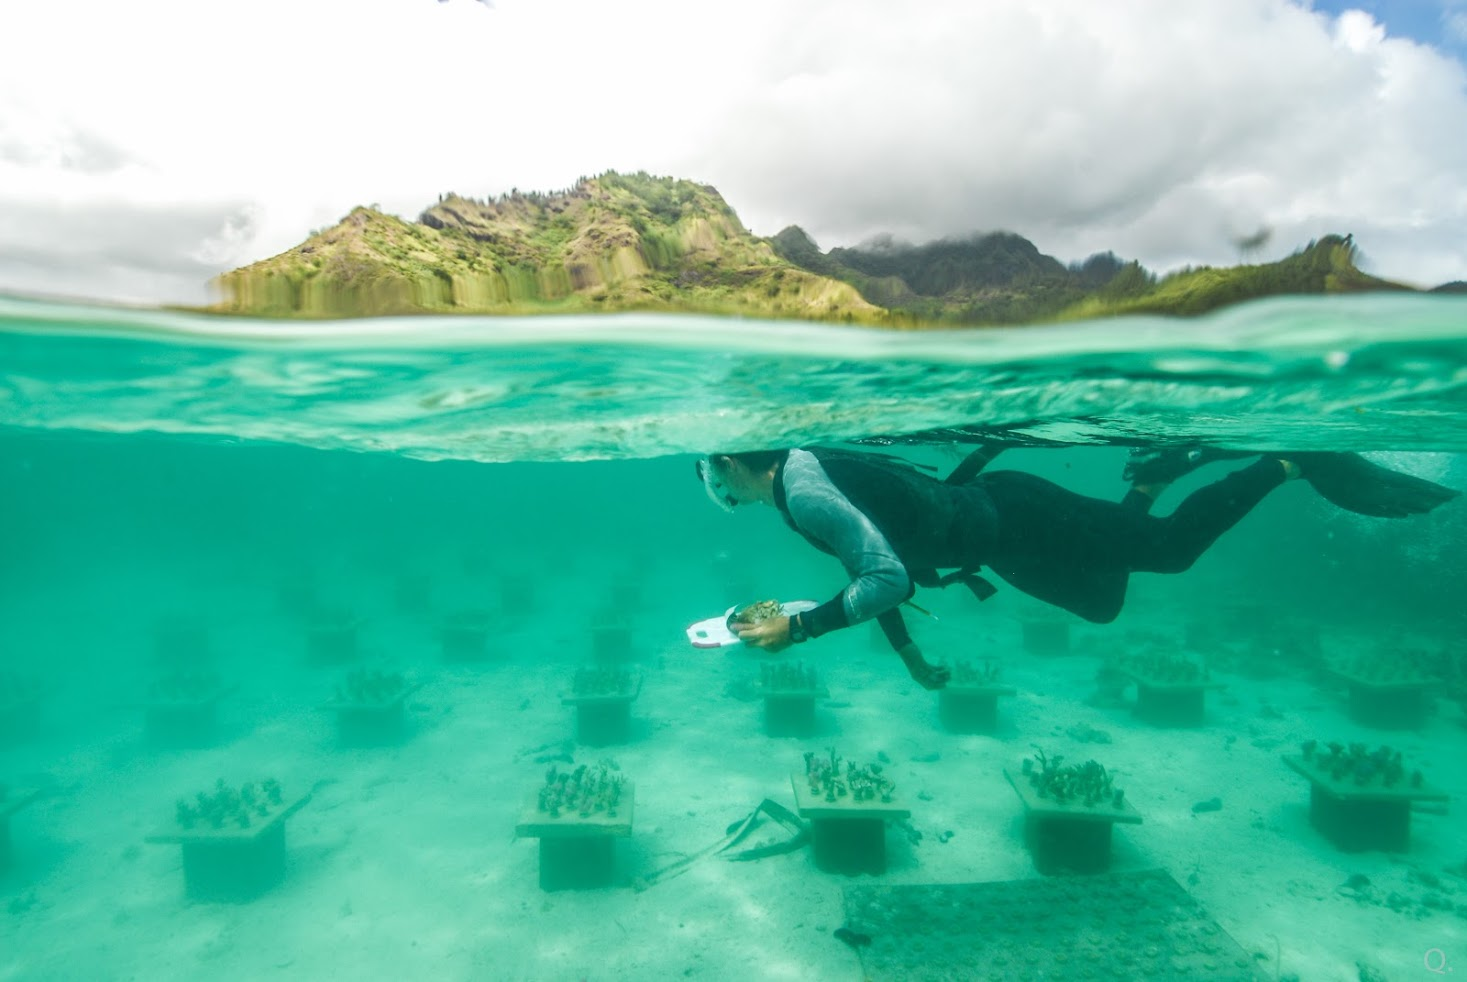 Cody Clements surveys rows of coral 